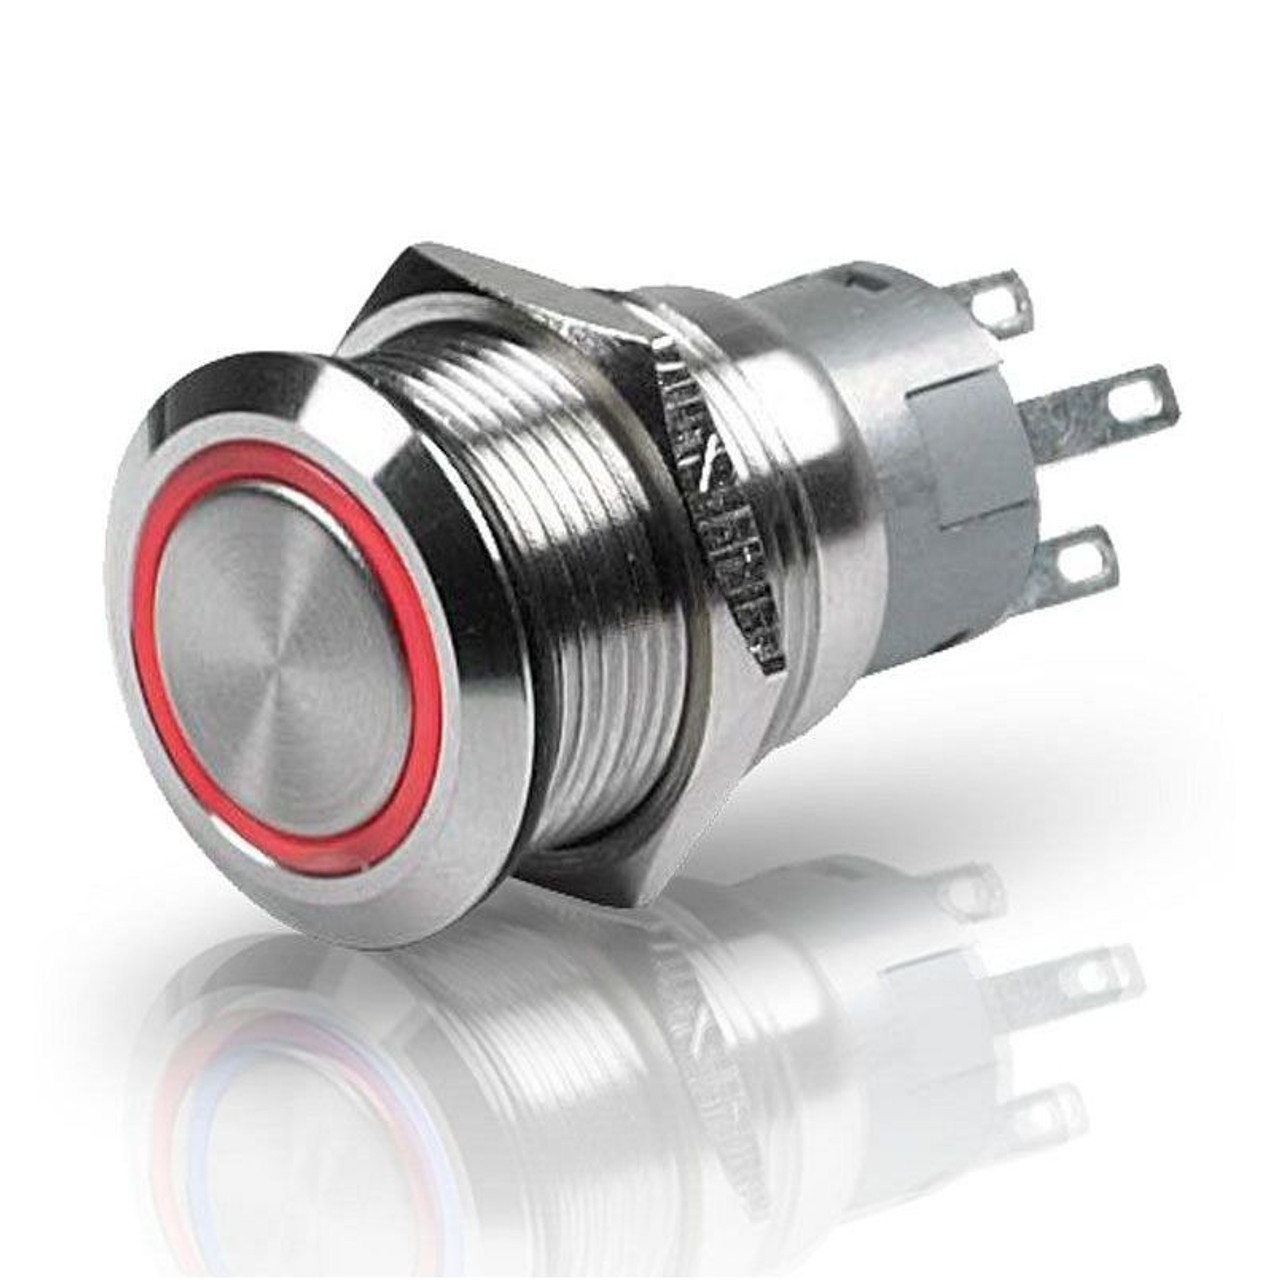 Hella Marine - Stainless Steel LED Switches - 12V, Red, Latching, IP67 (958455001) - Apollo Lighting